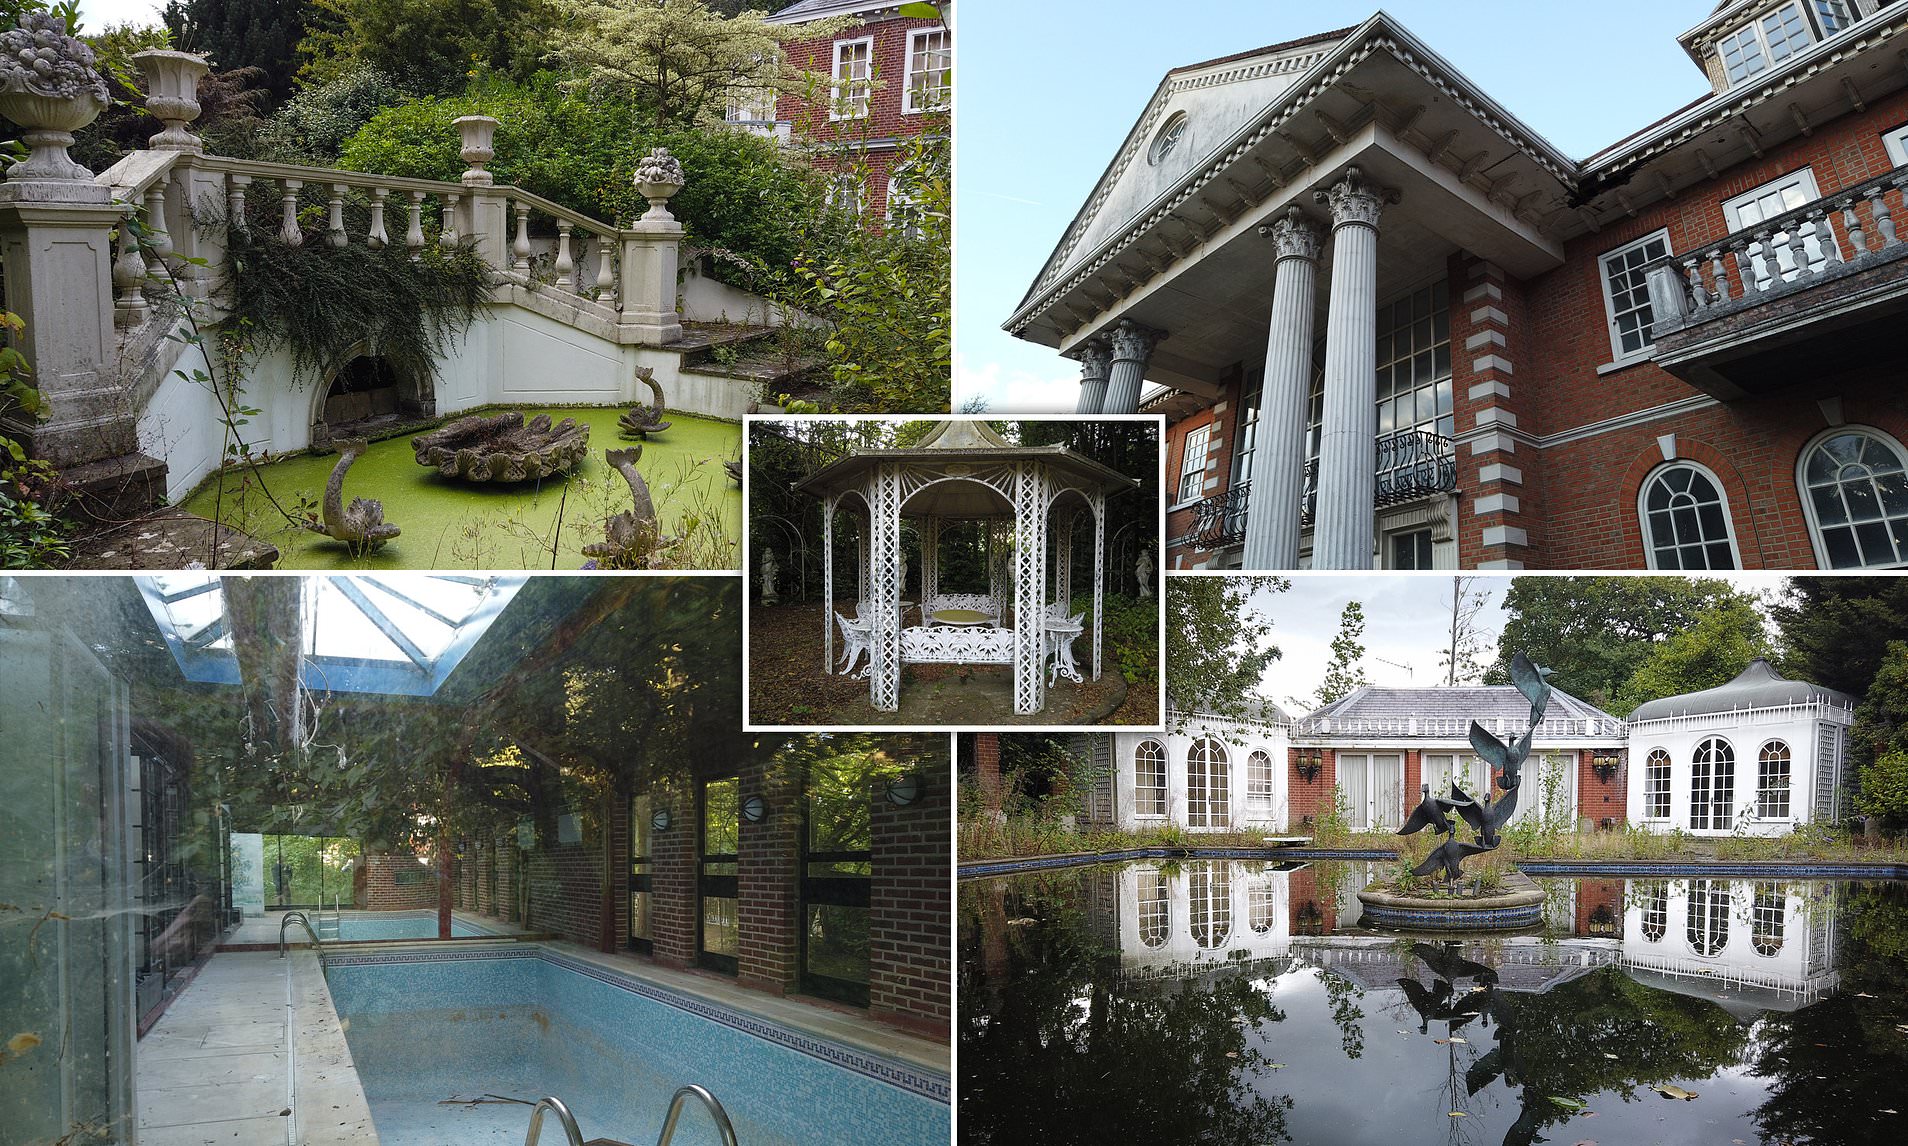 London's "Billionaire's Row" and it's abandoned mansions